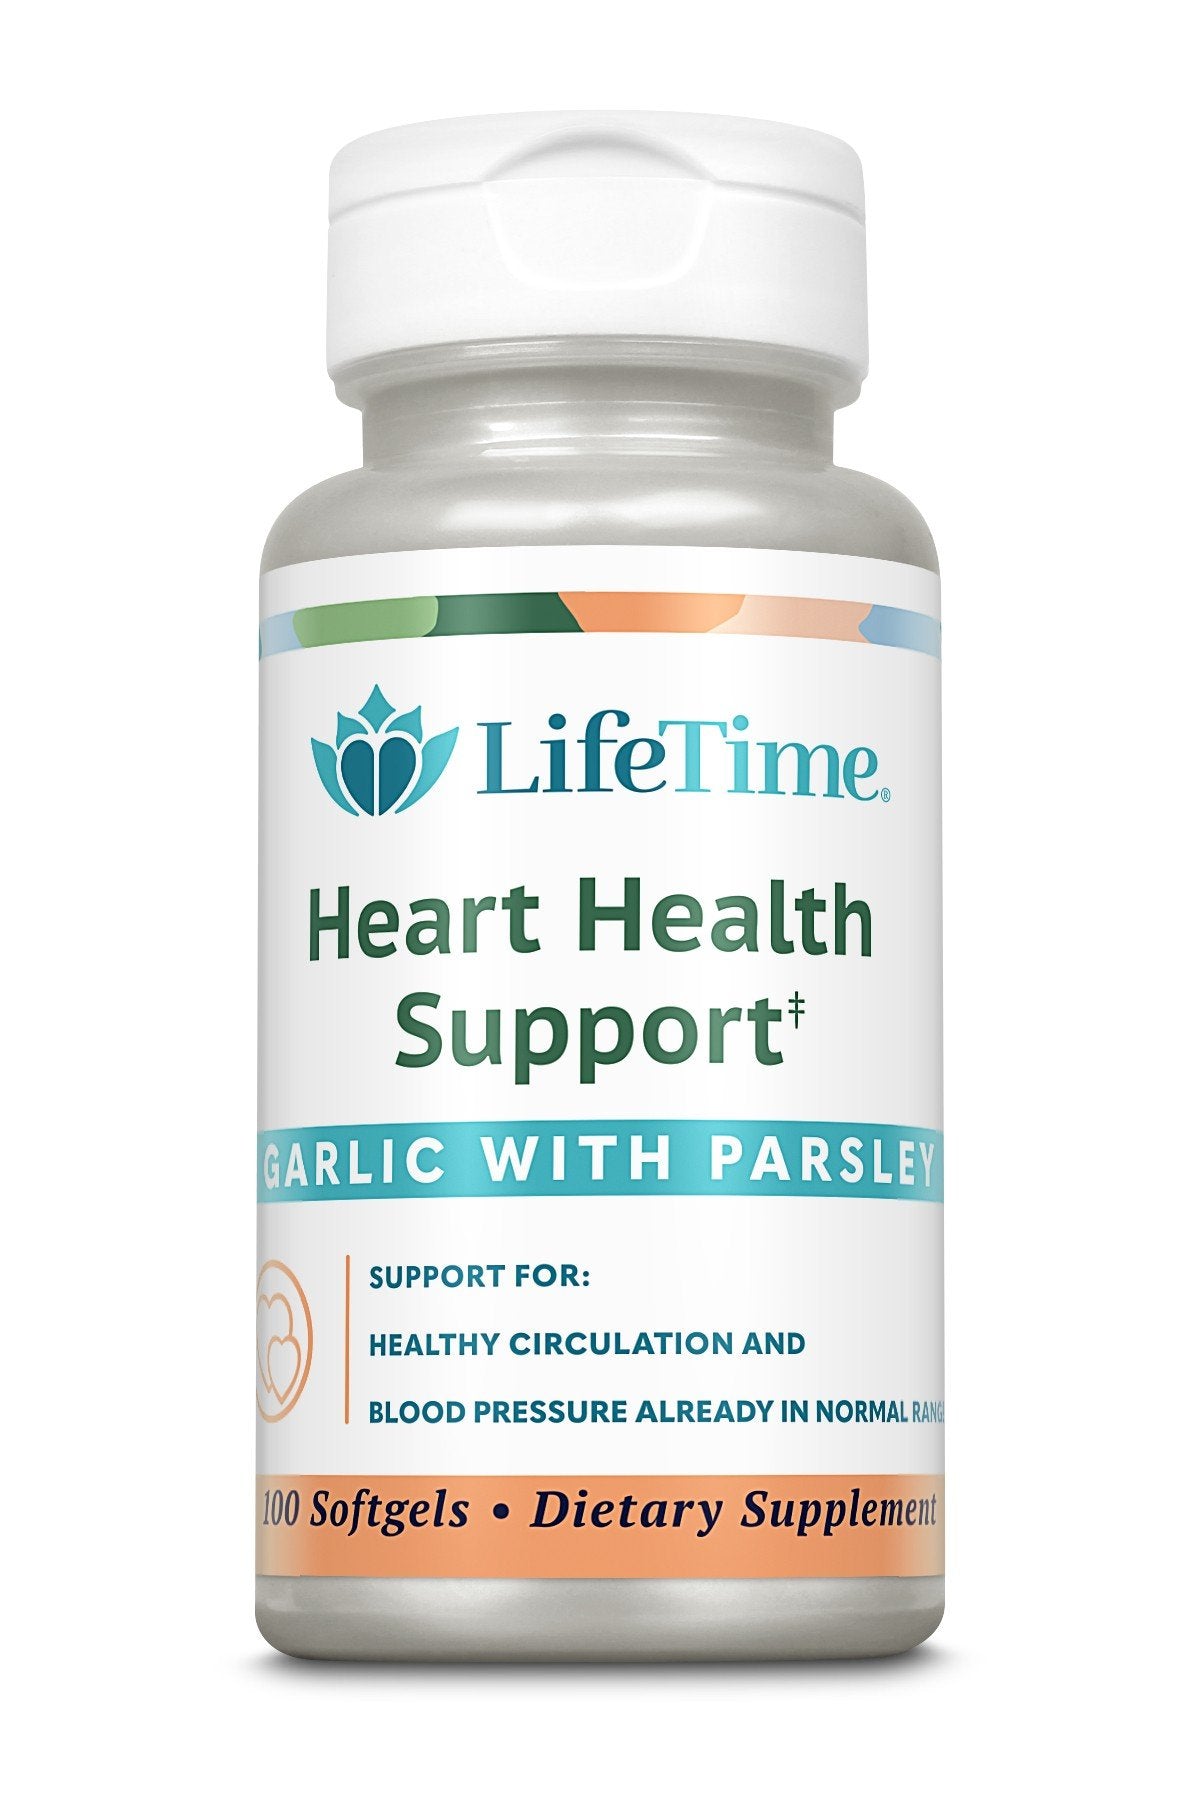 LifeTime Heart Health Support Garlic  with Parsley 100 Softgel